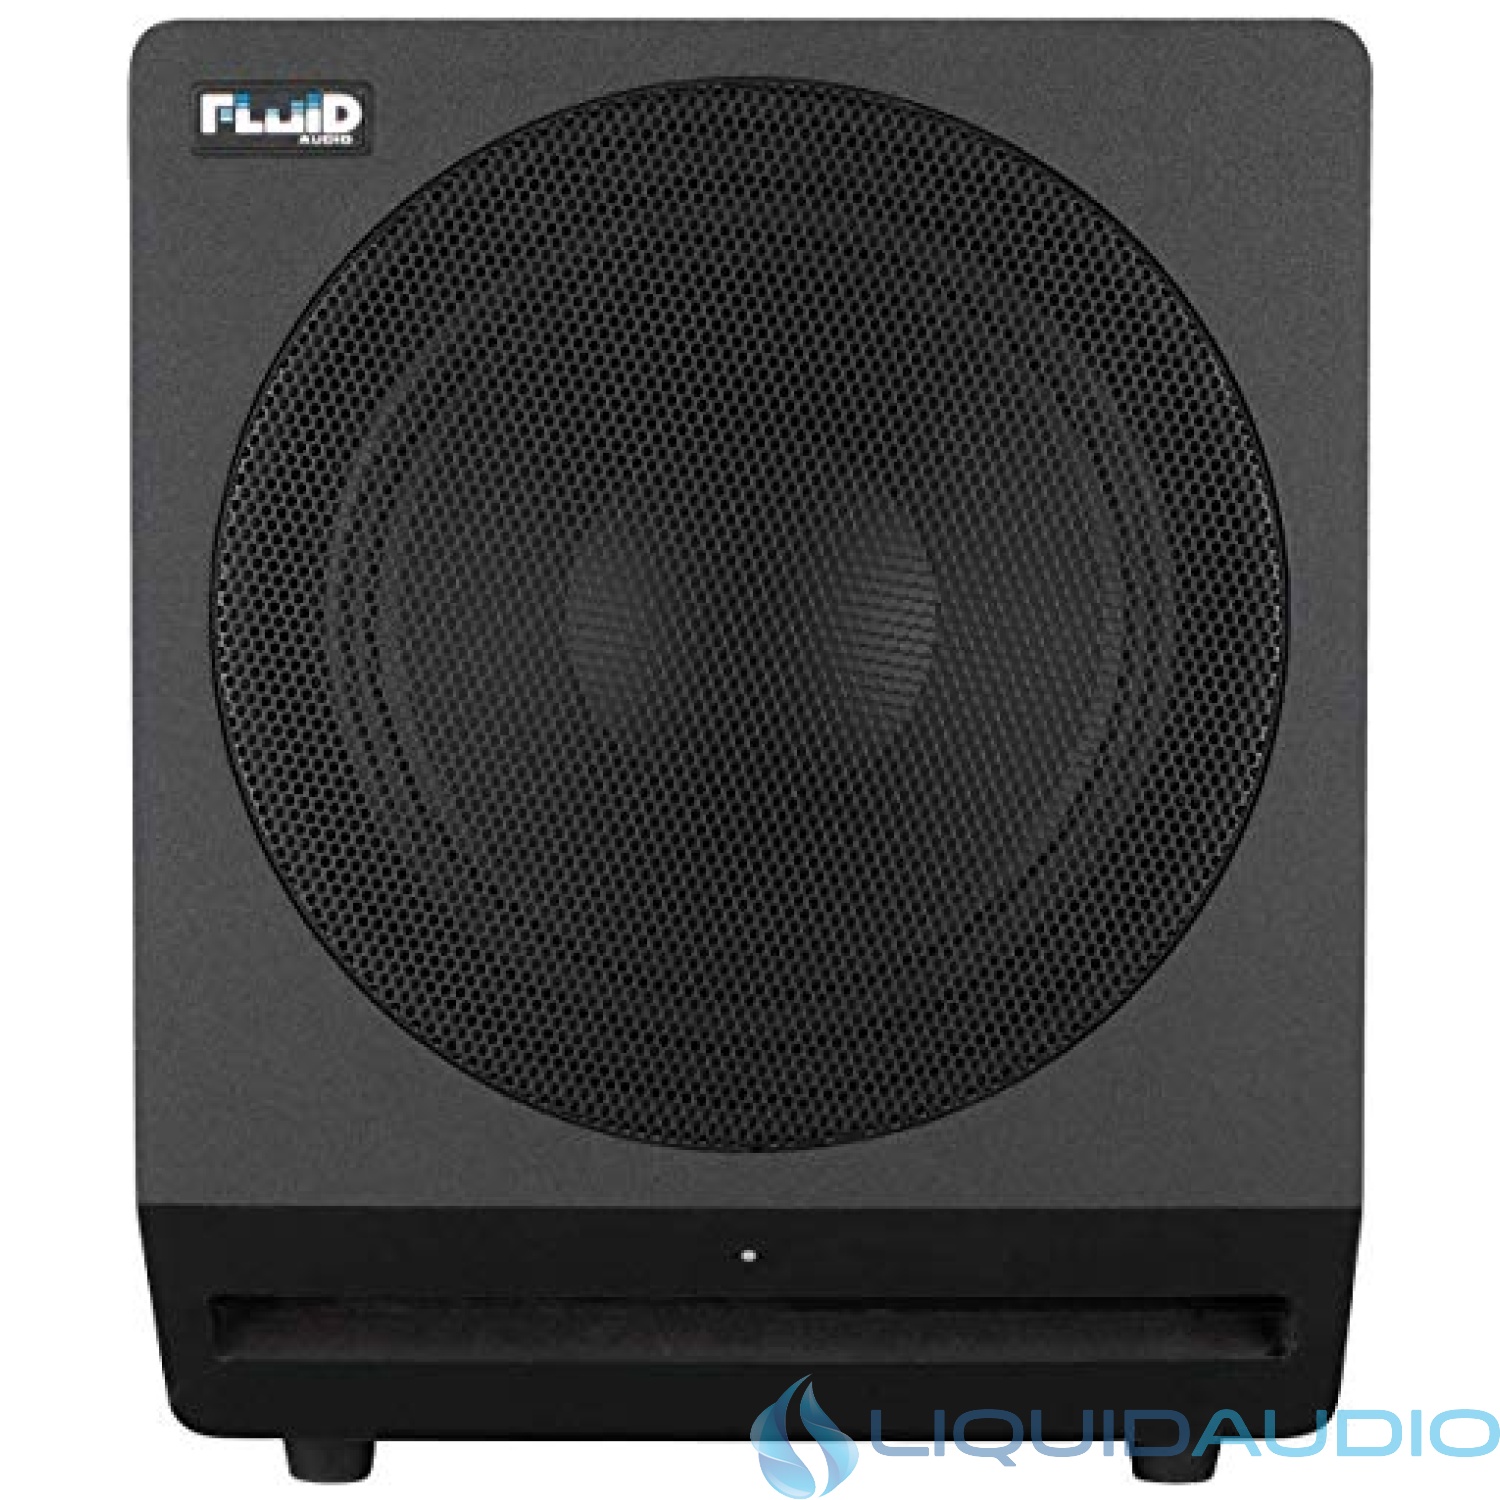 Fluid Audio FC10S: 10-inch powered reference studio subwoofer, 200W Class D, 20-200Hz, auto stanby, GND Lift